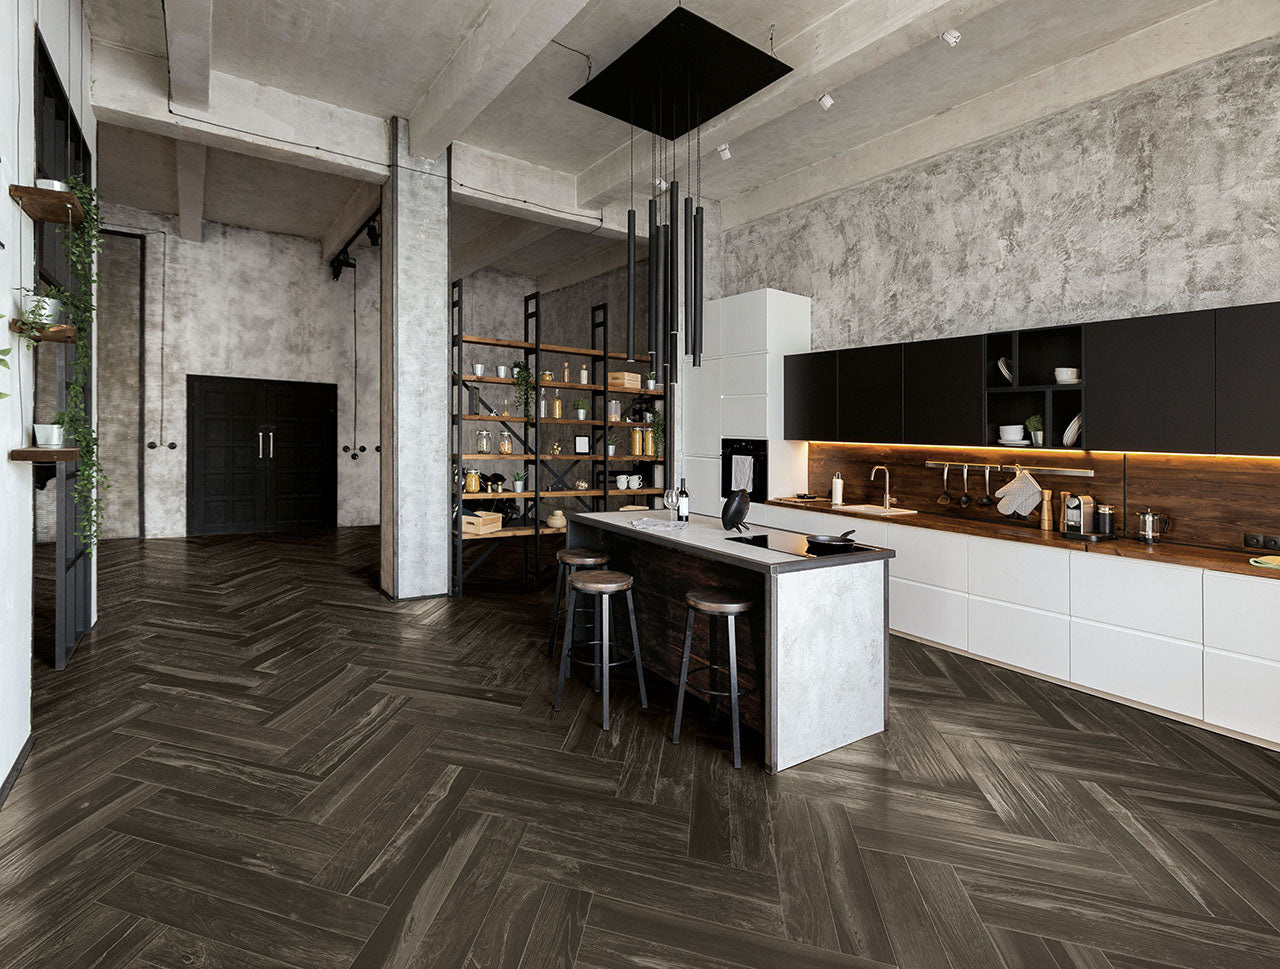 Floors 2000 - Lacquered Wood 6 in. x 36 in. Porcelain Tile - Black